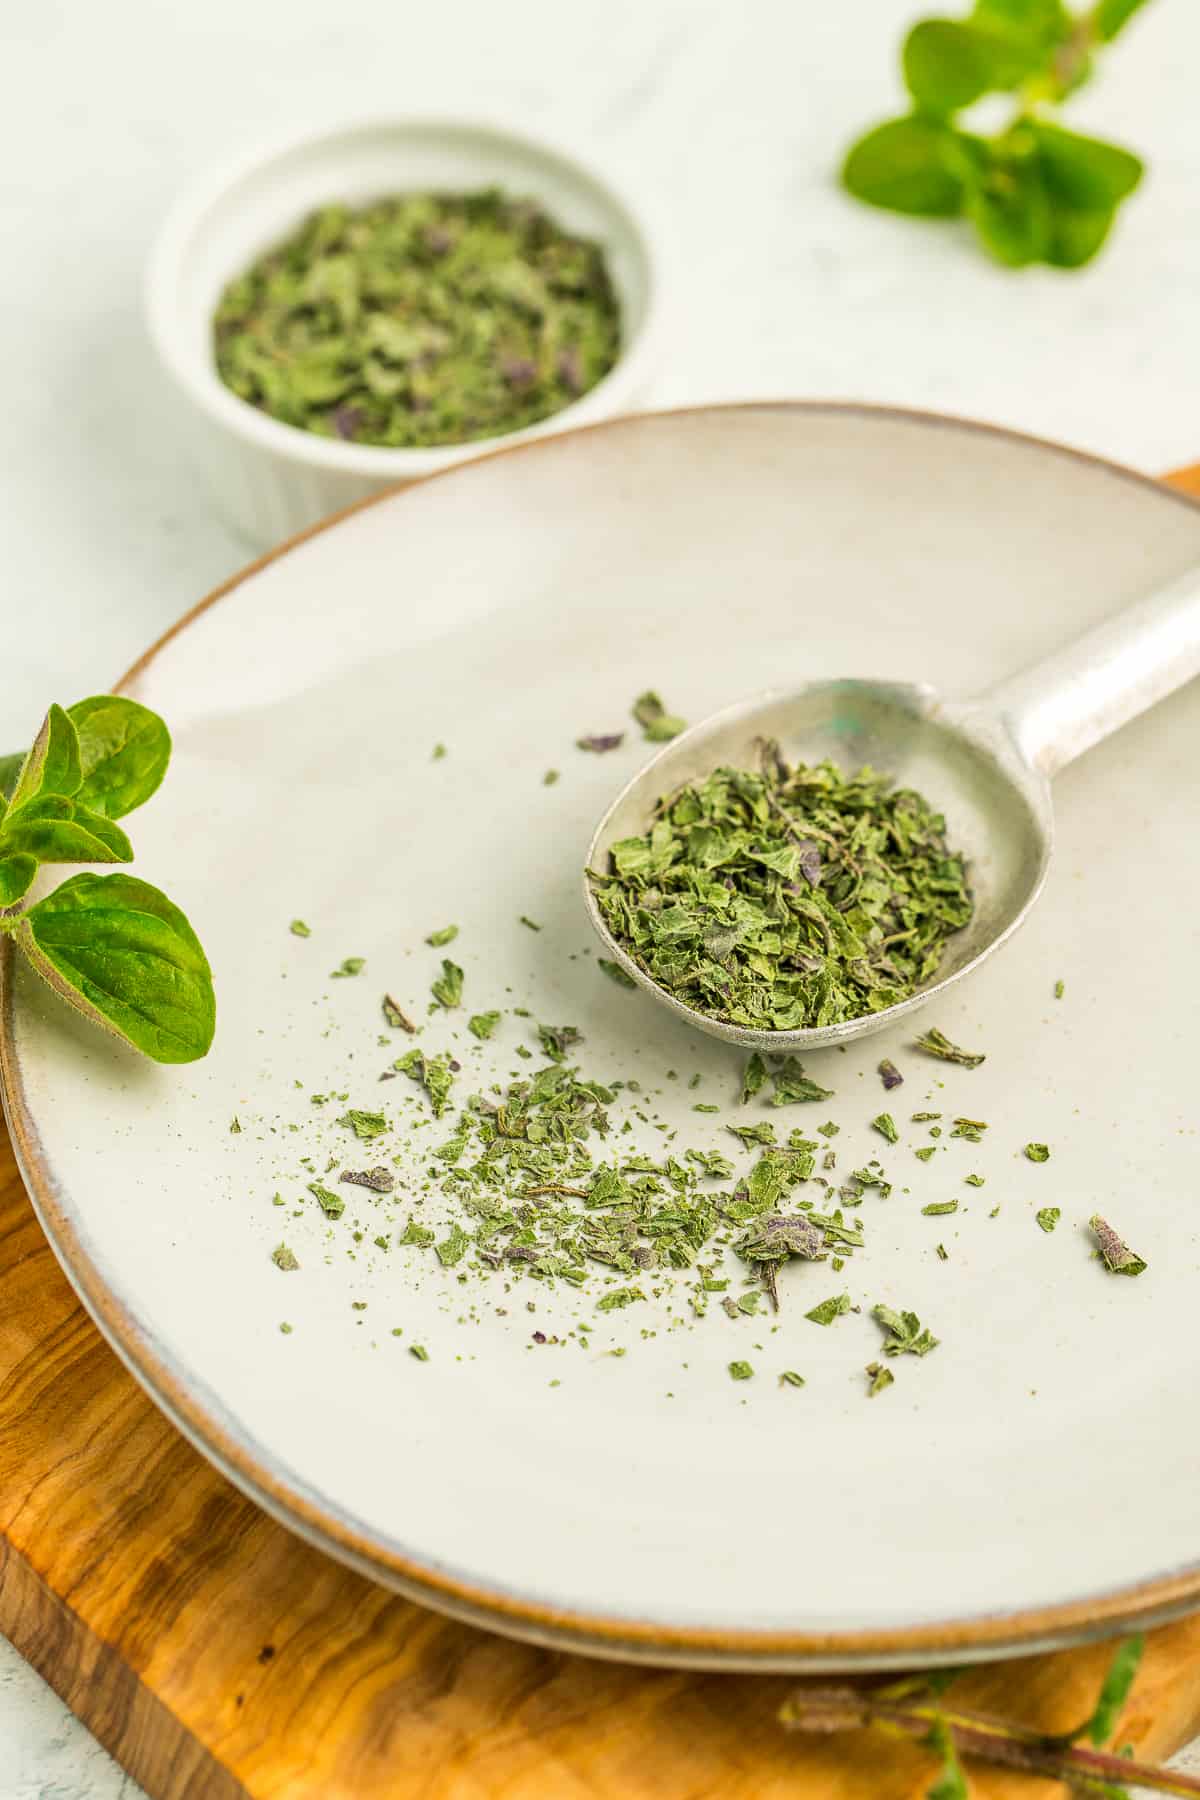 a measuring spoon with dehydrated oregano on a light grey plate.